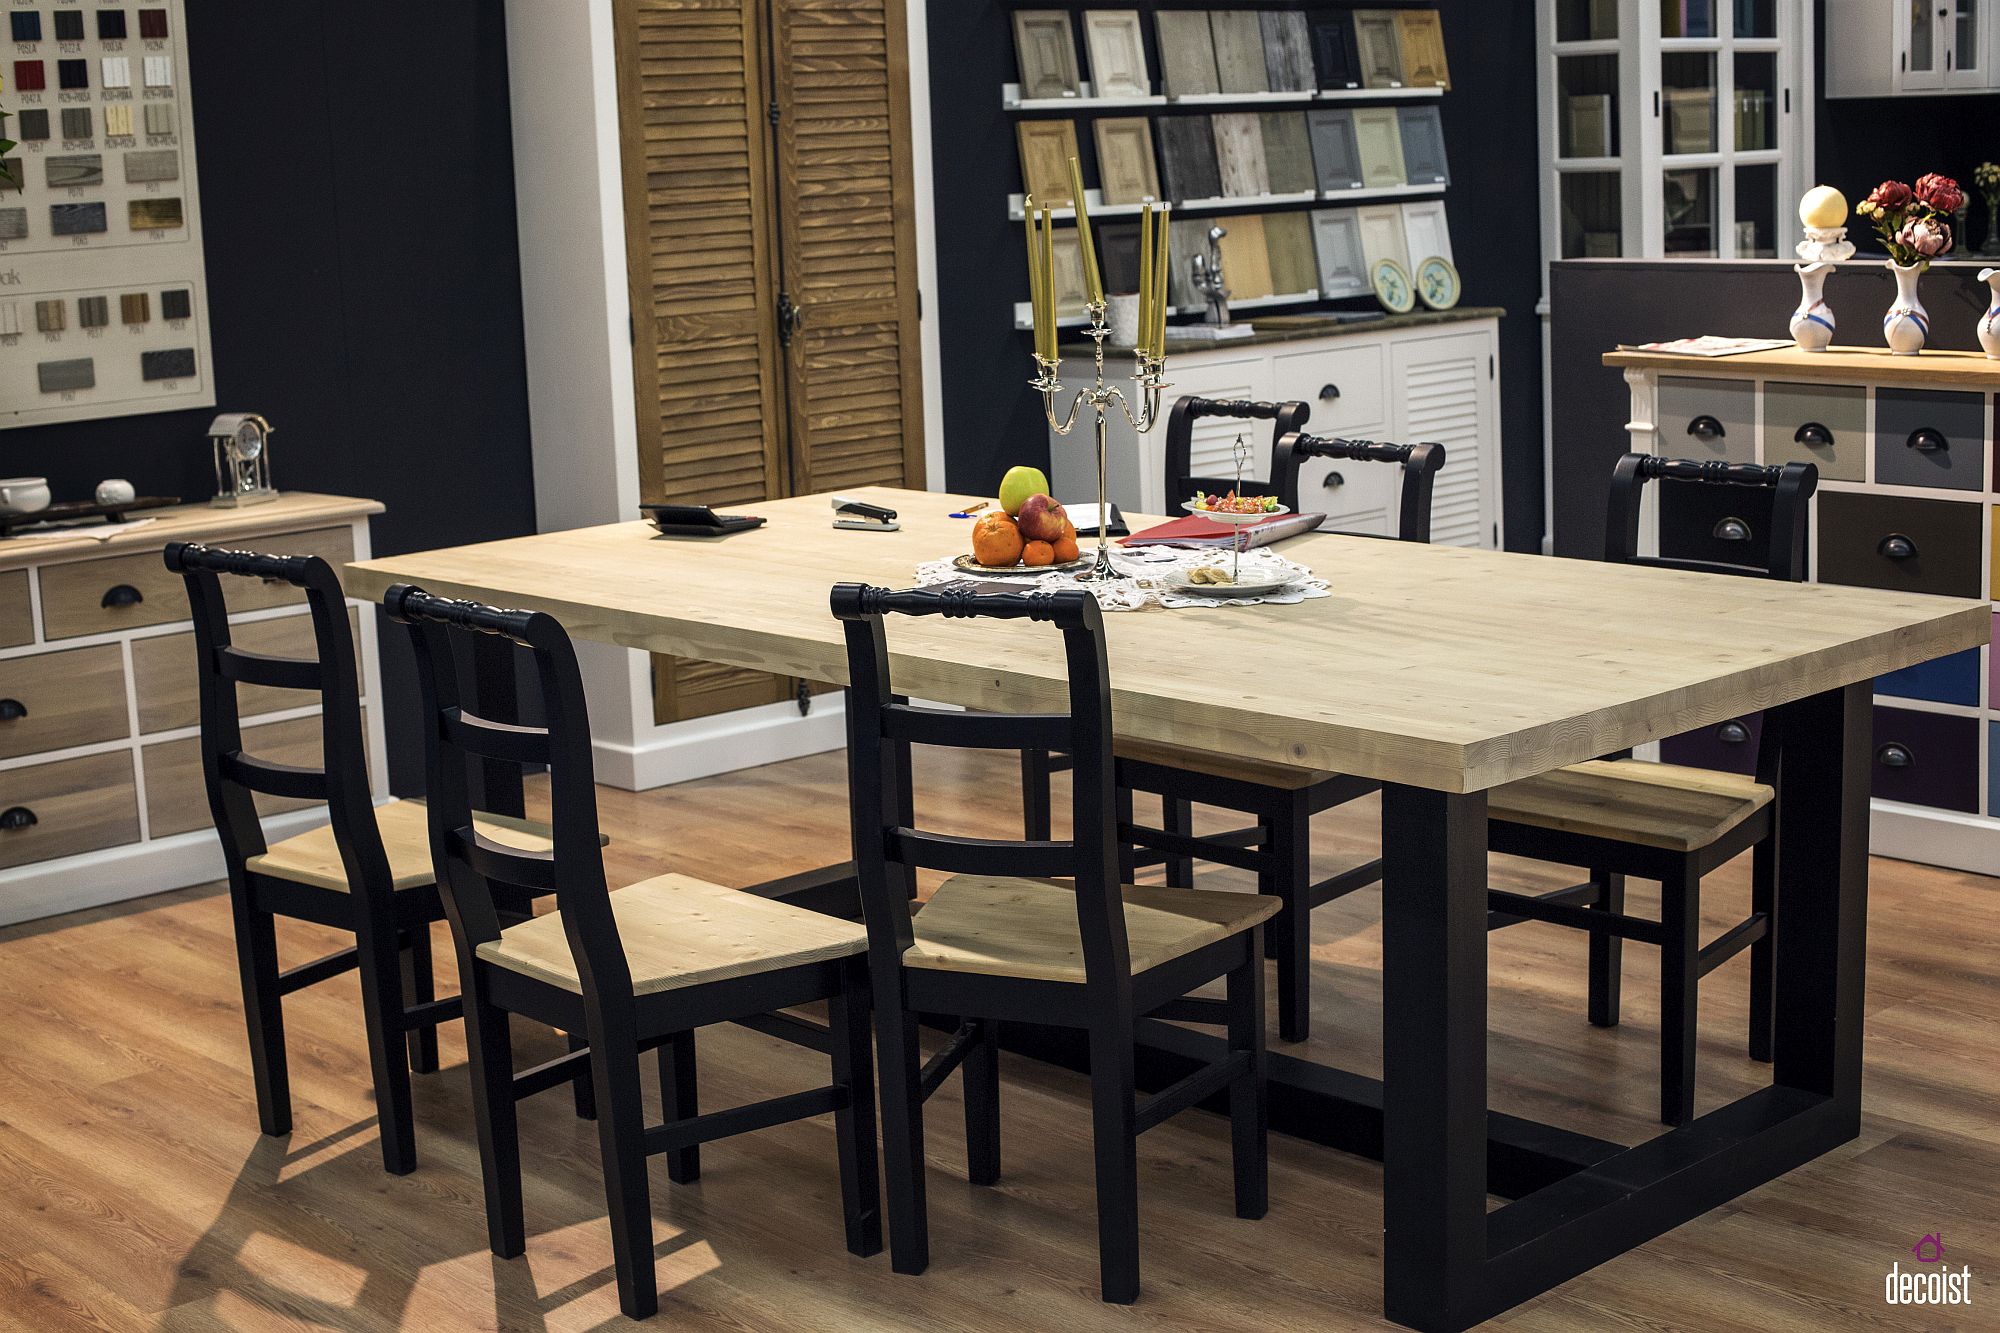 Dining-table-with-straight-lines-and-unqiue-dining-chairs-combine-modernity-with-traditional-appeal